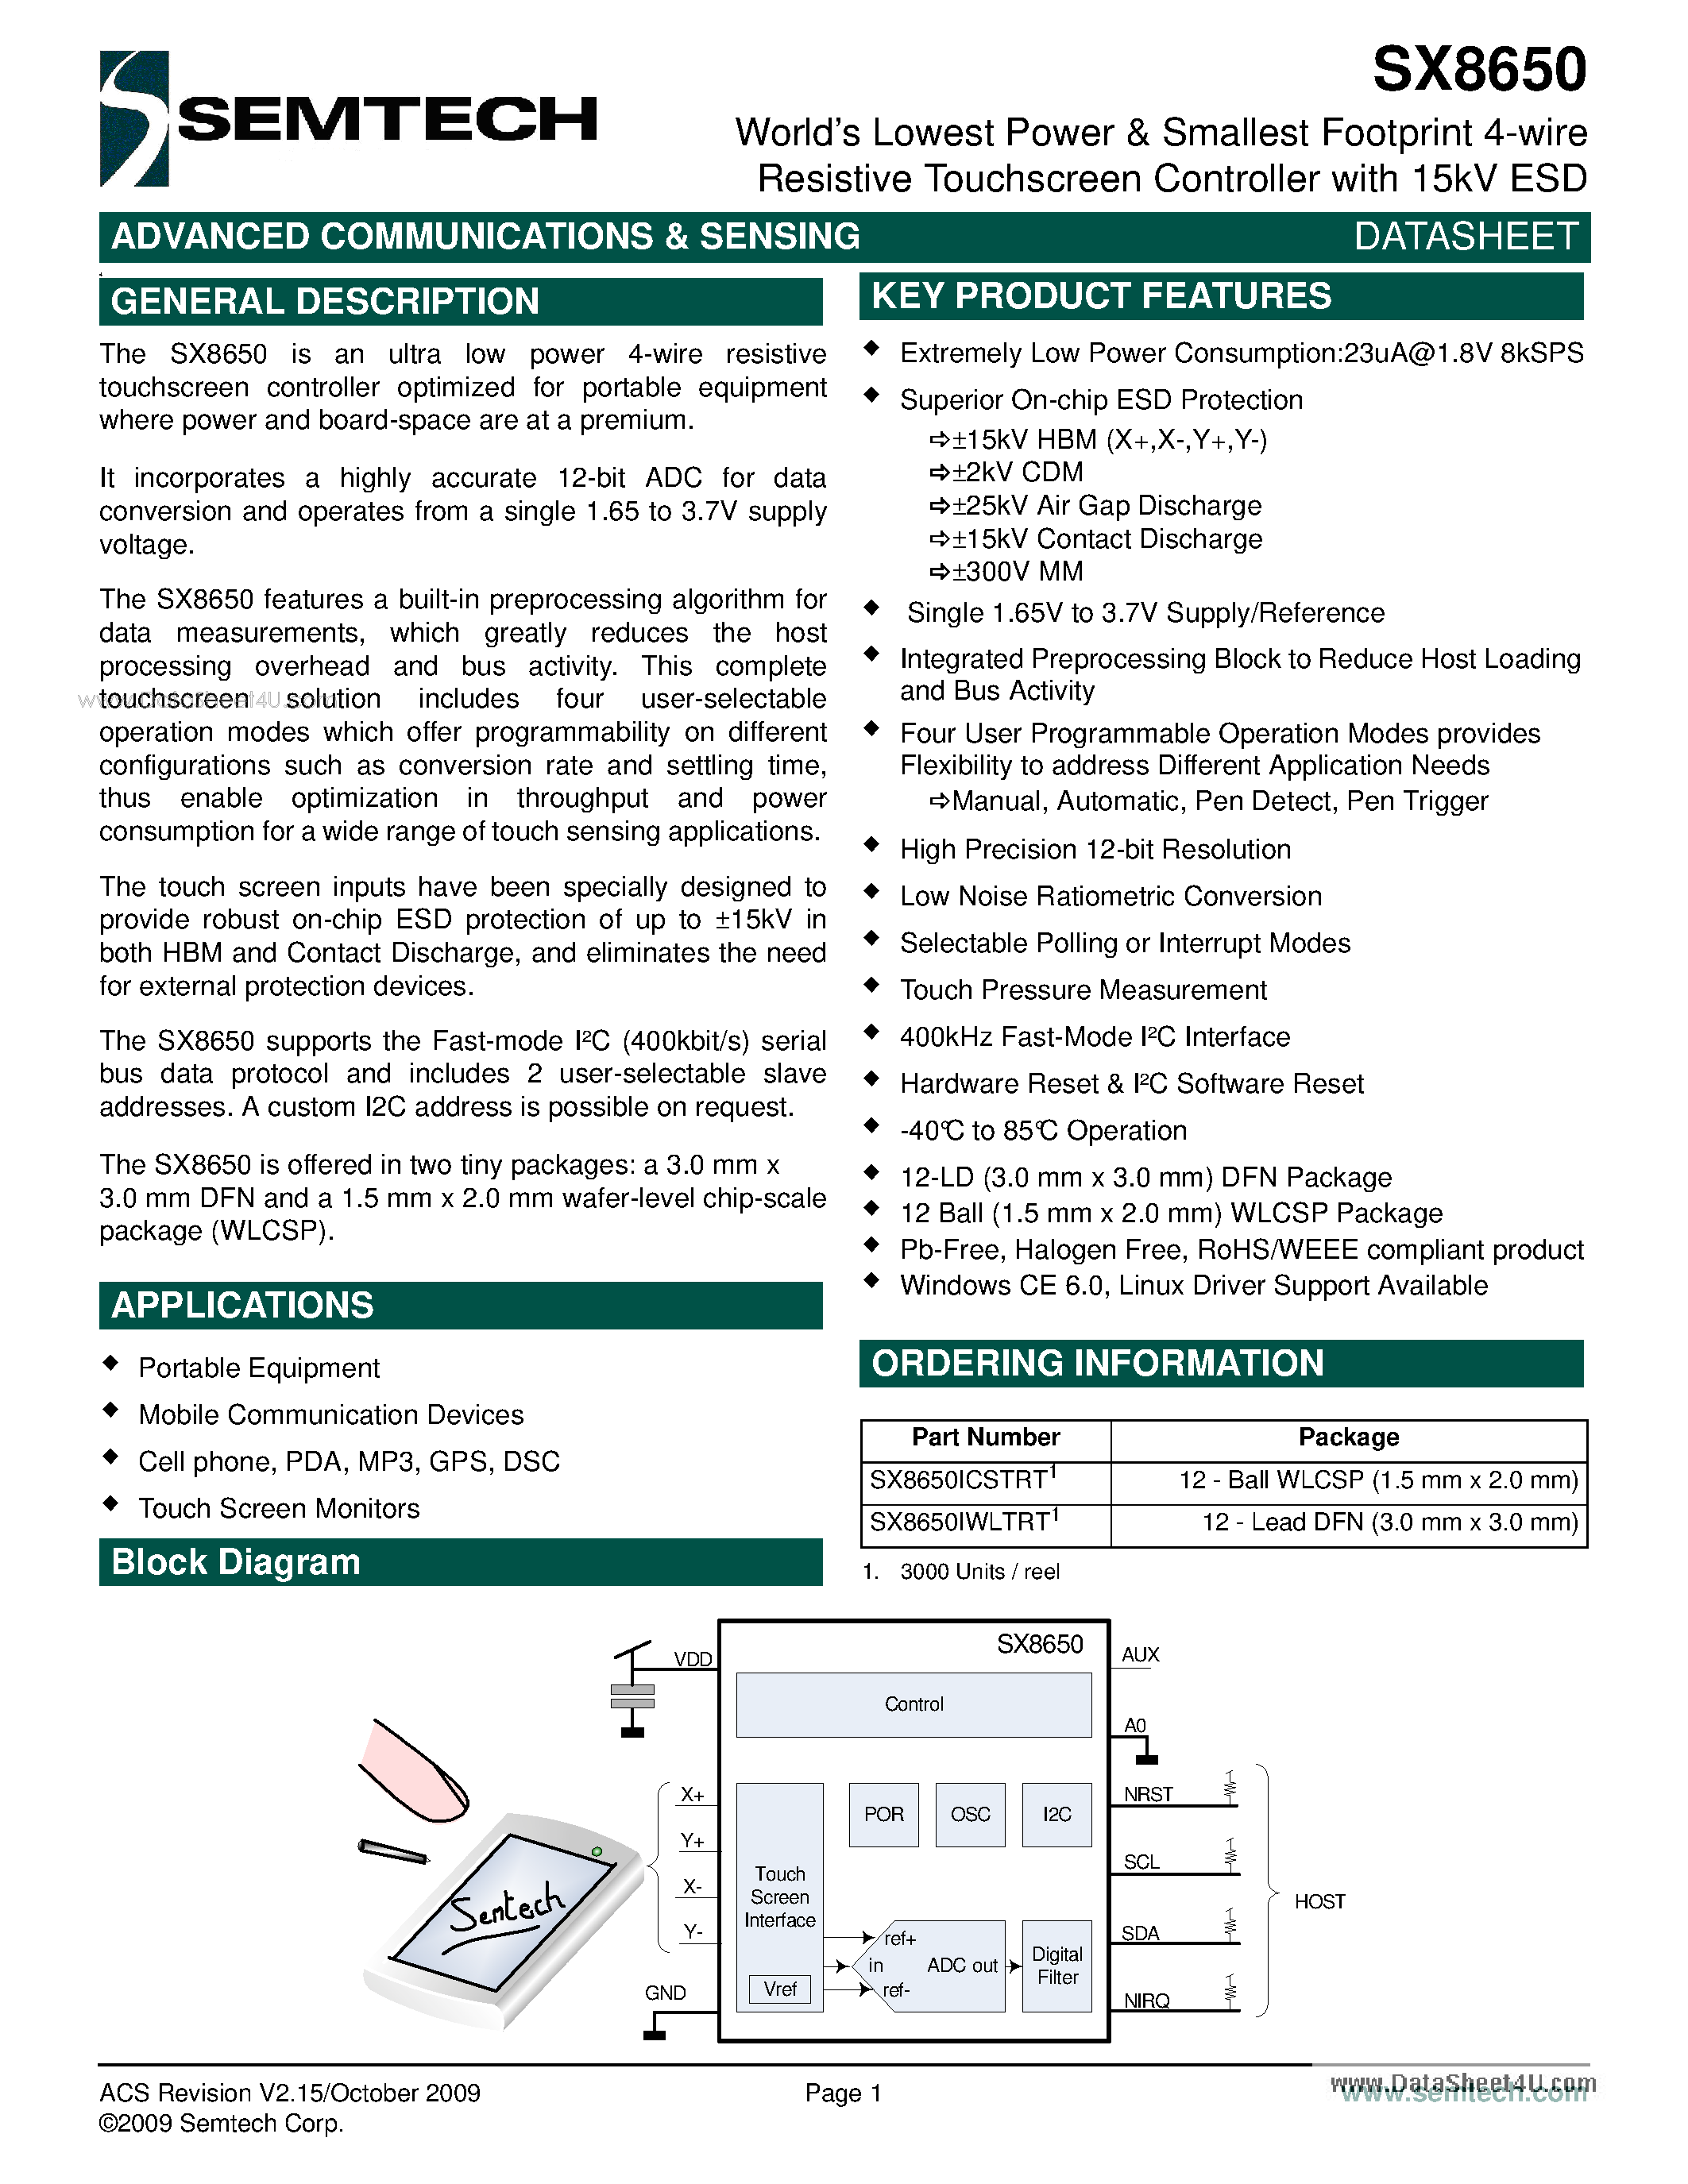 Datasheet SX8650 - Worlds Lowest Power & Smallest Footprint 4-wire Resistive Touchscreen Controller page 1